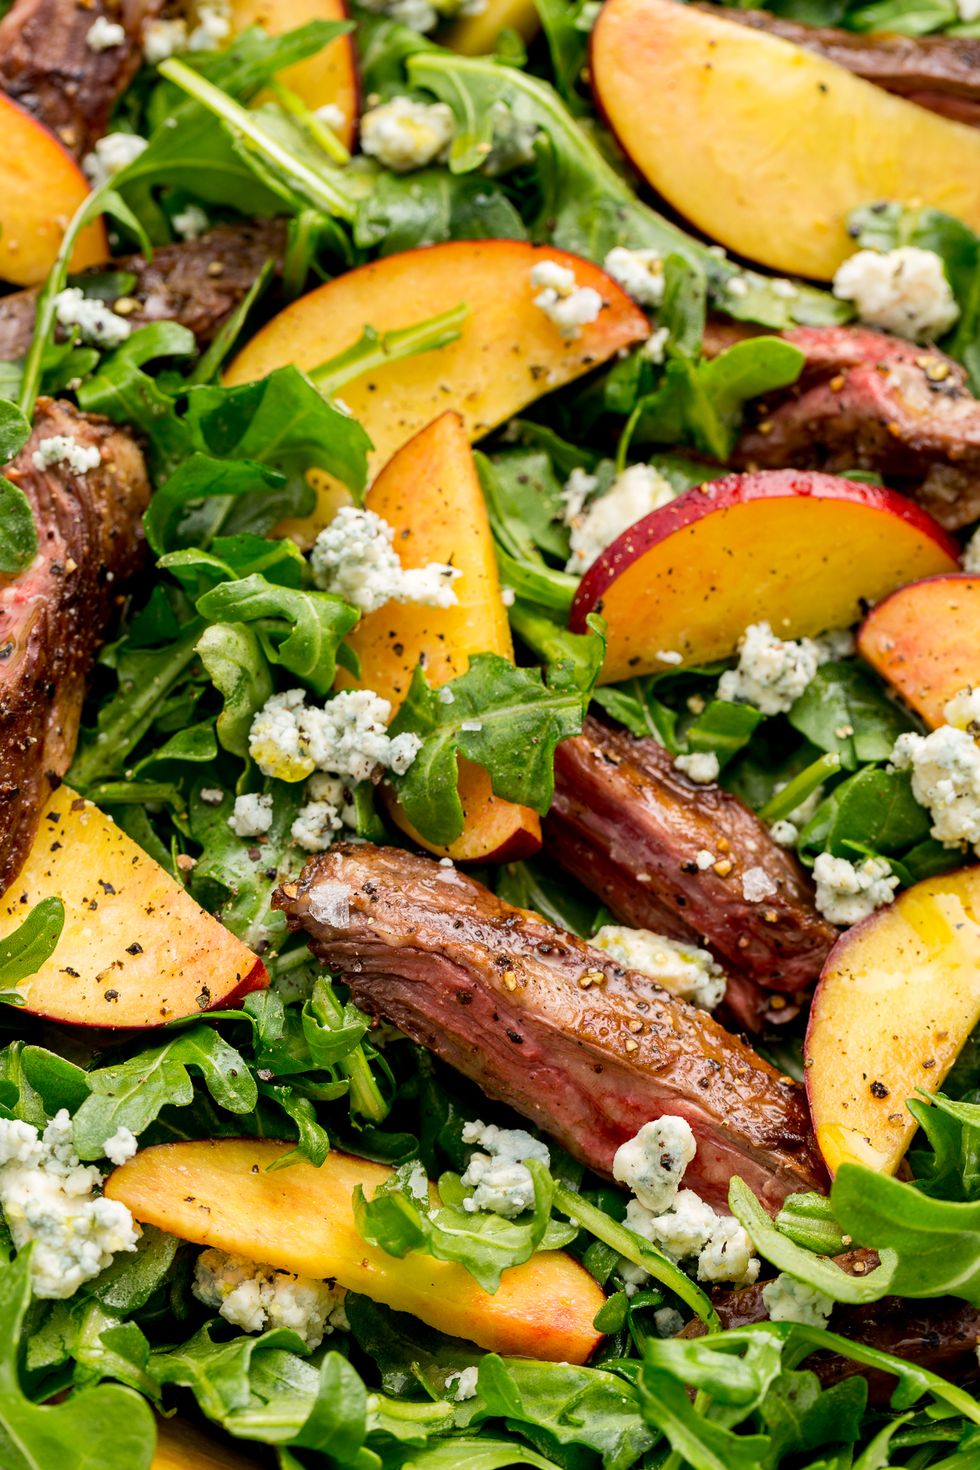 https://hips.hearstapps.com/hmg-prod/images/grilled-steak-salad-peaches-1648238831.jpg?crop=1xw:0.99975xh;center,top&resize=980:*